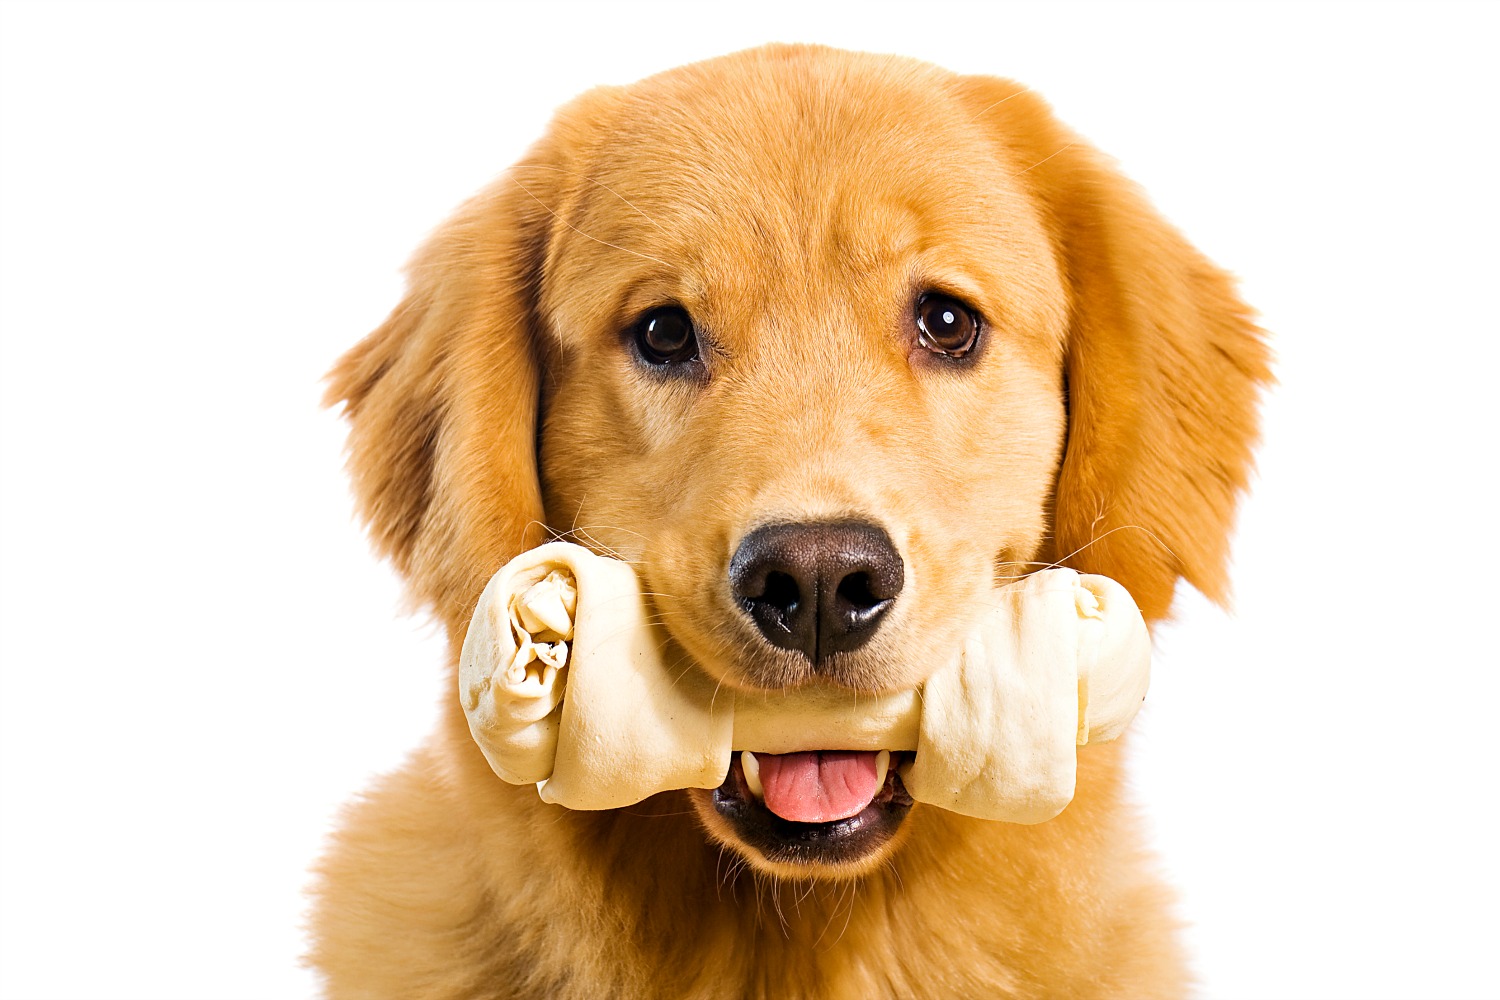 According to the AKC, rawhide dog chews are safe for SOME dogs, but not most dogs.